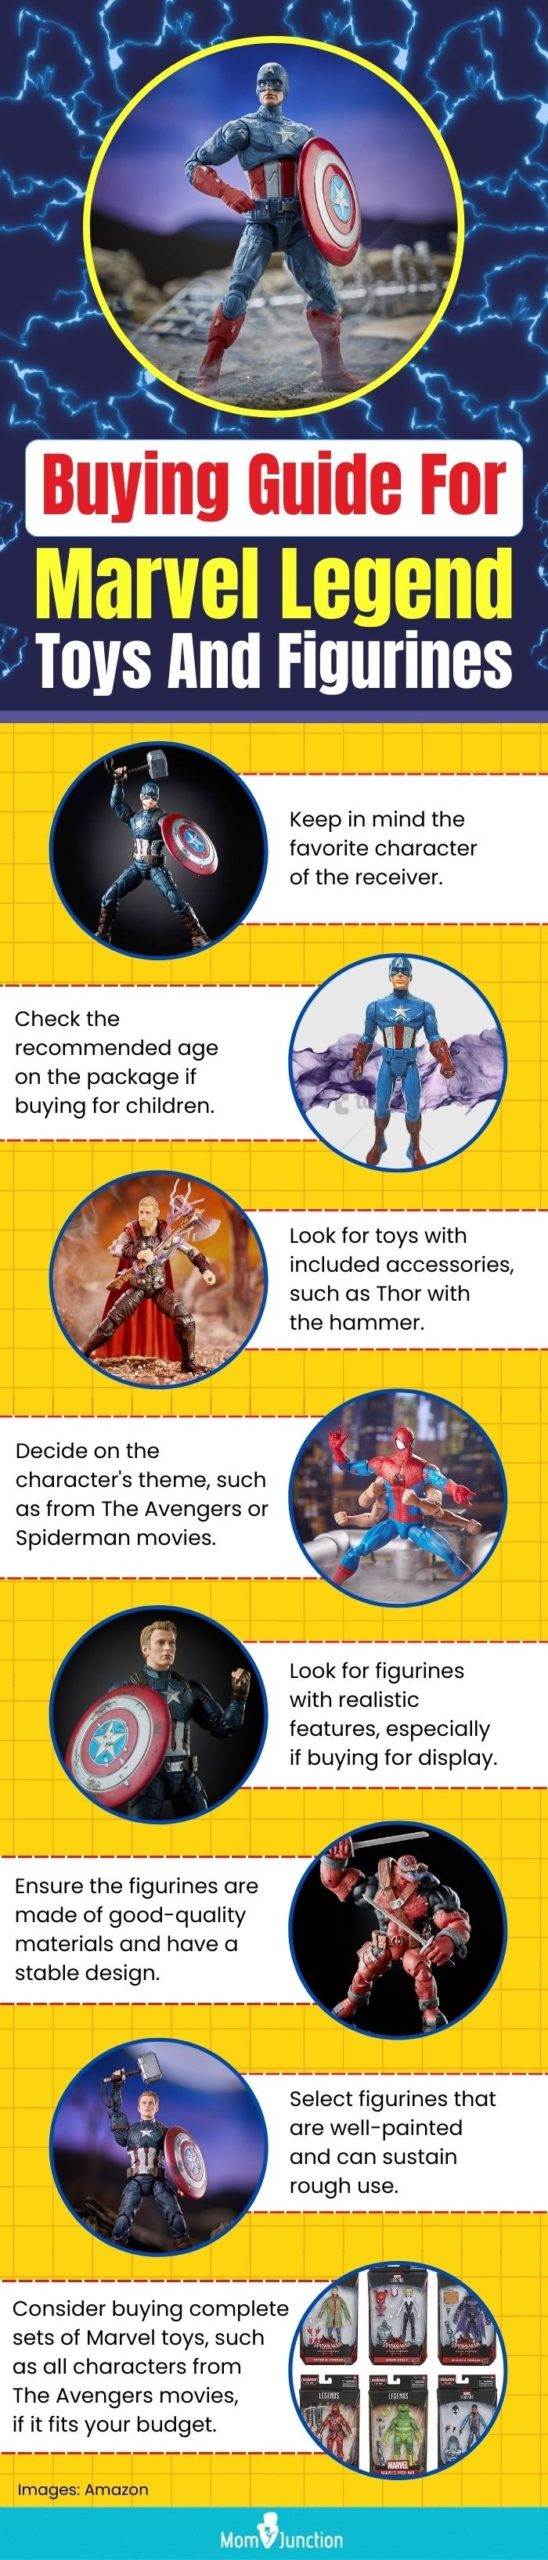 Buying Guide For Marvel Legend Toys And Figurines (infographic)